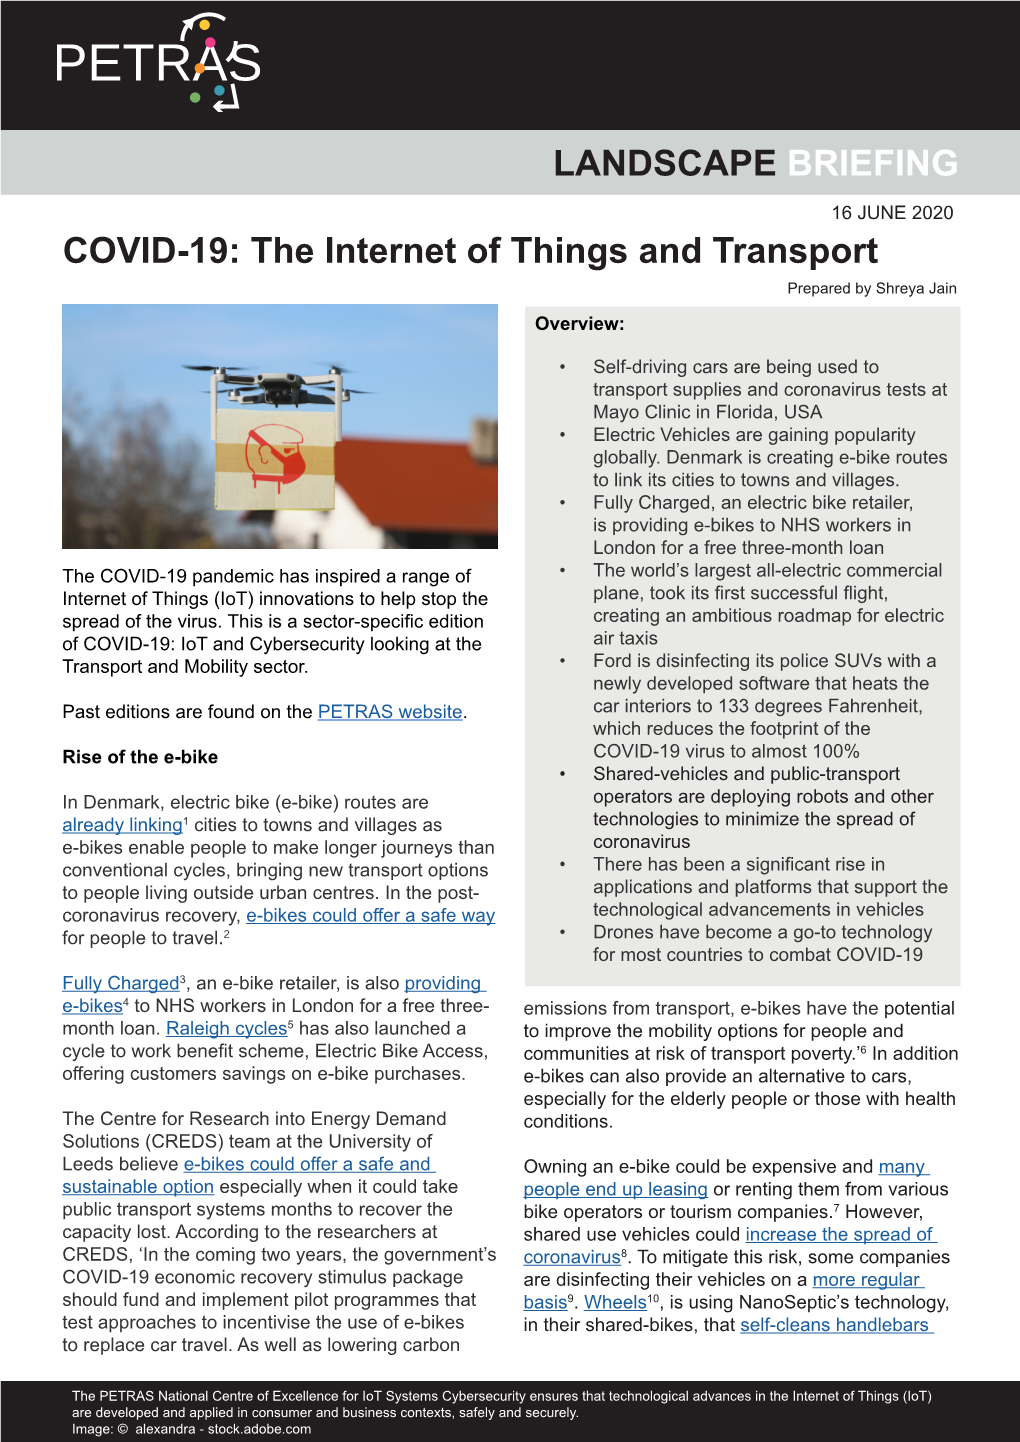 COVID-19: the Internet of Things and Transport Prepared by Shreya Jain